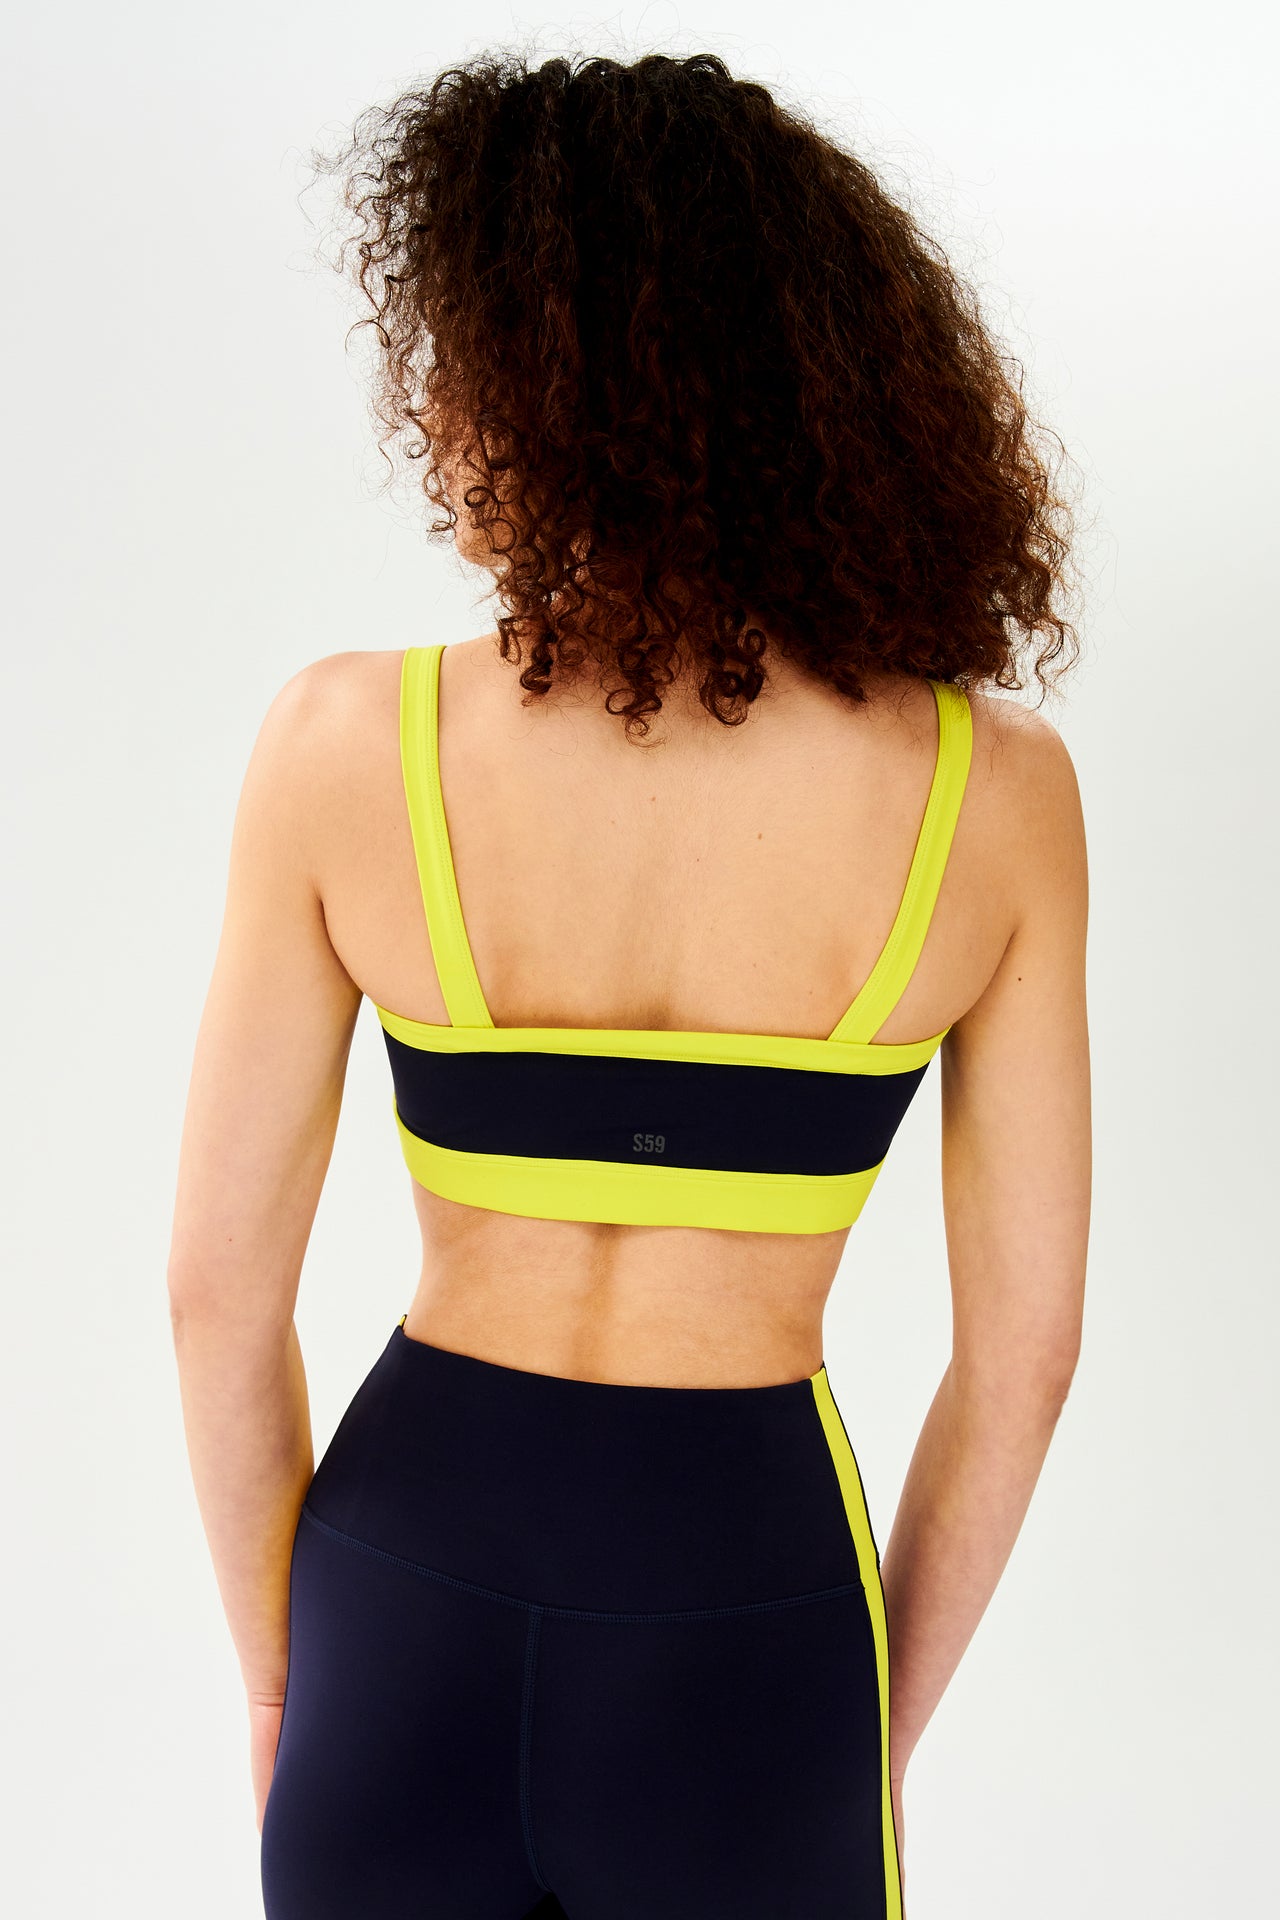 The back view of a woman wearing a SPLITS59 Monah Rigor Bra in Indigo/Chartreuse, designed for maximum workout comfort and support.